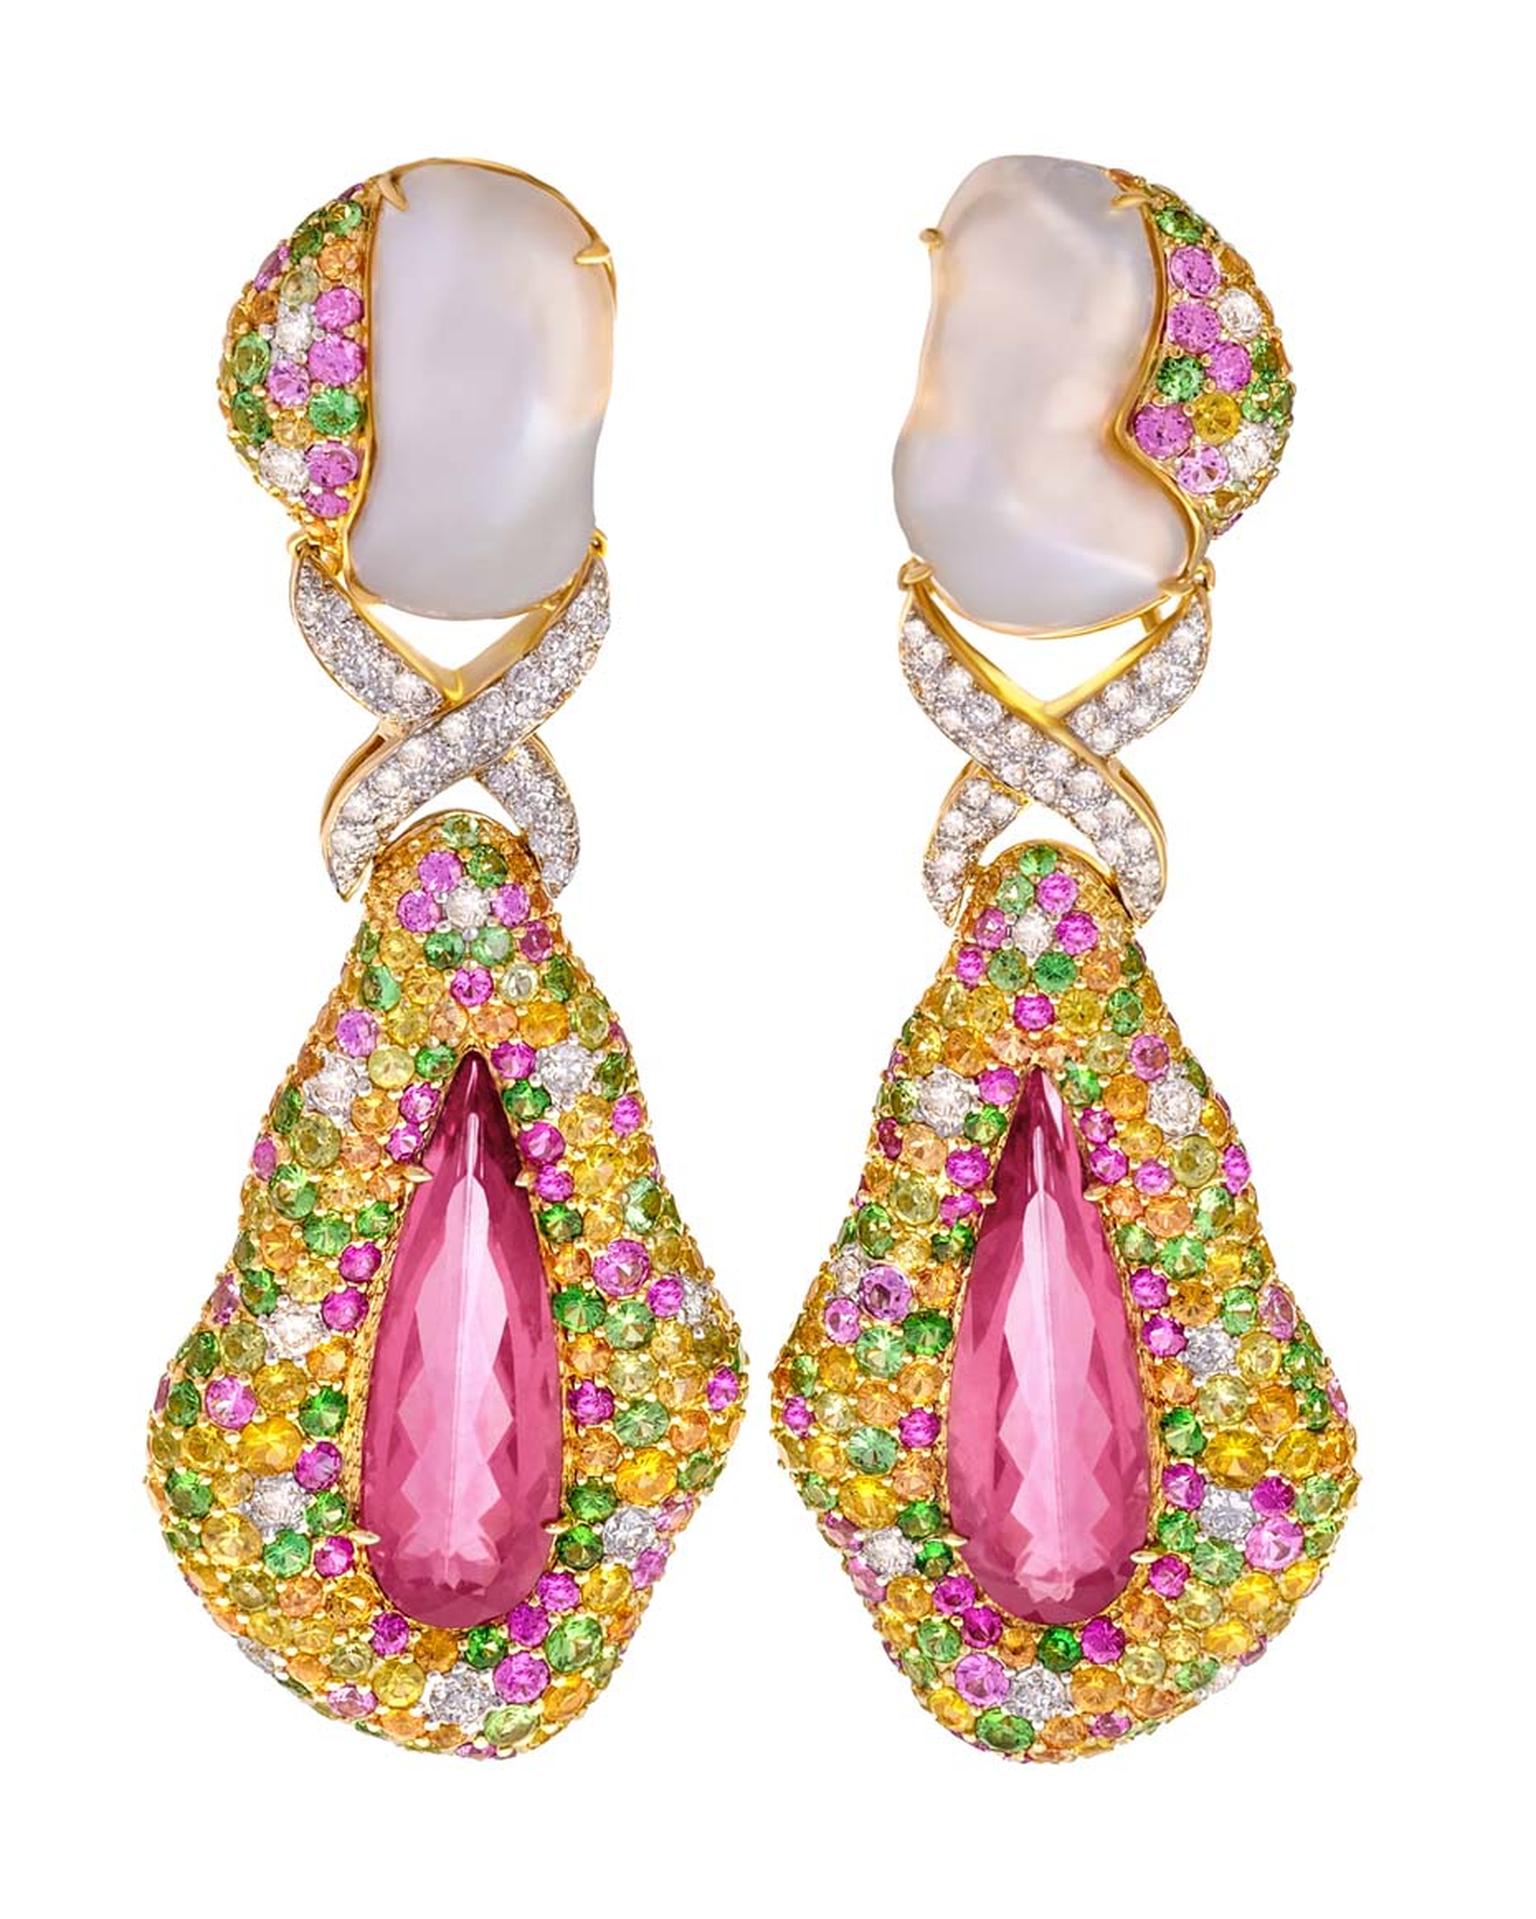 Margot McKinney rubellite drop earrings with Baroque South Sea pearls, sapphires and diamonds ($45,000).